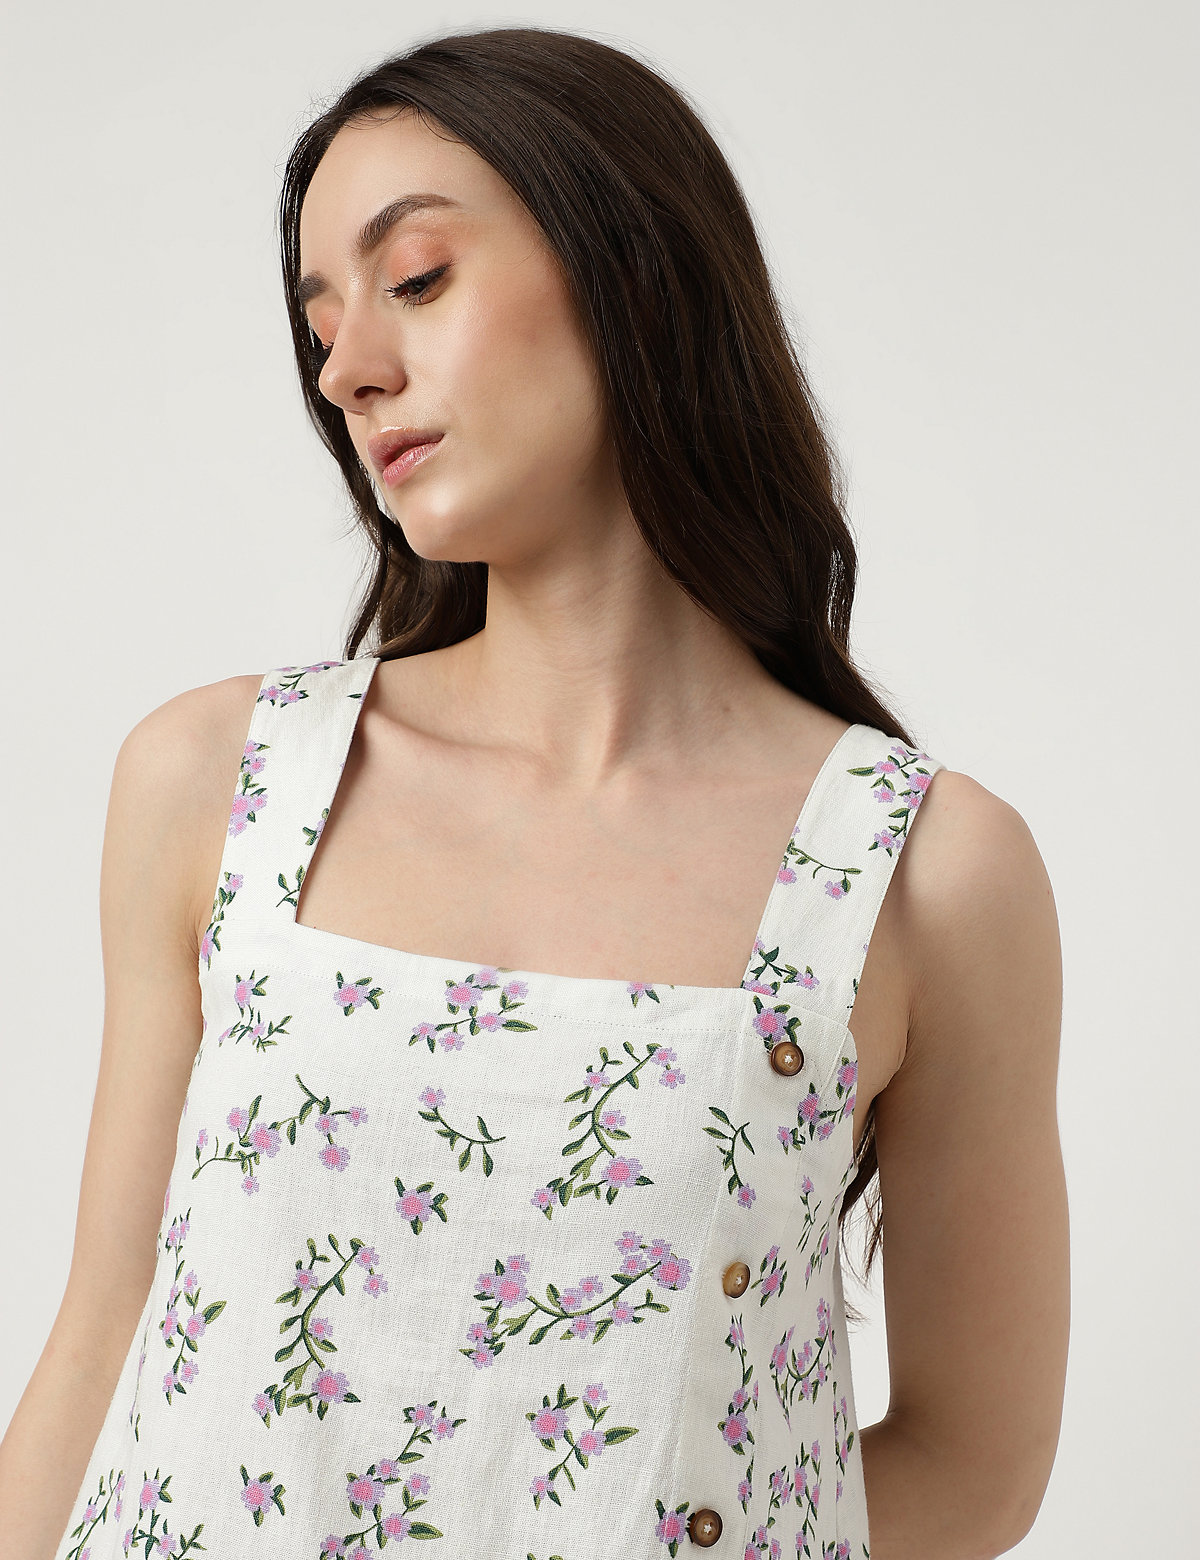 Linen Mix Printed Square Neck Top